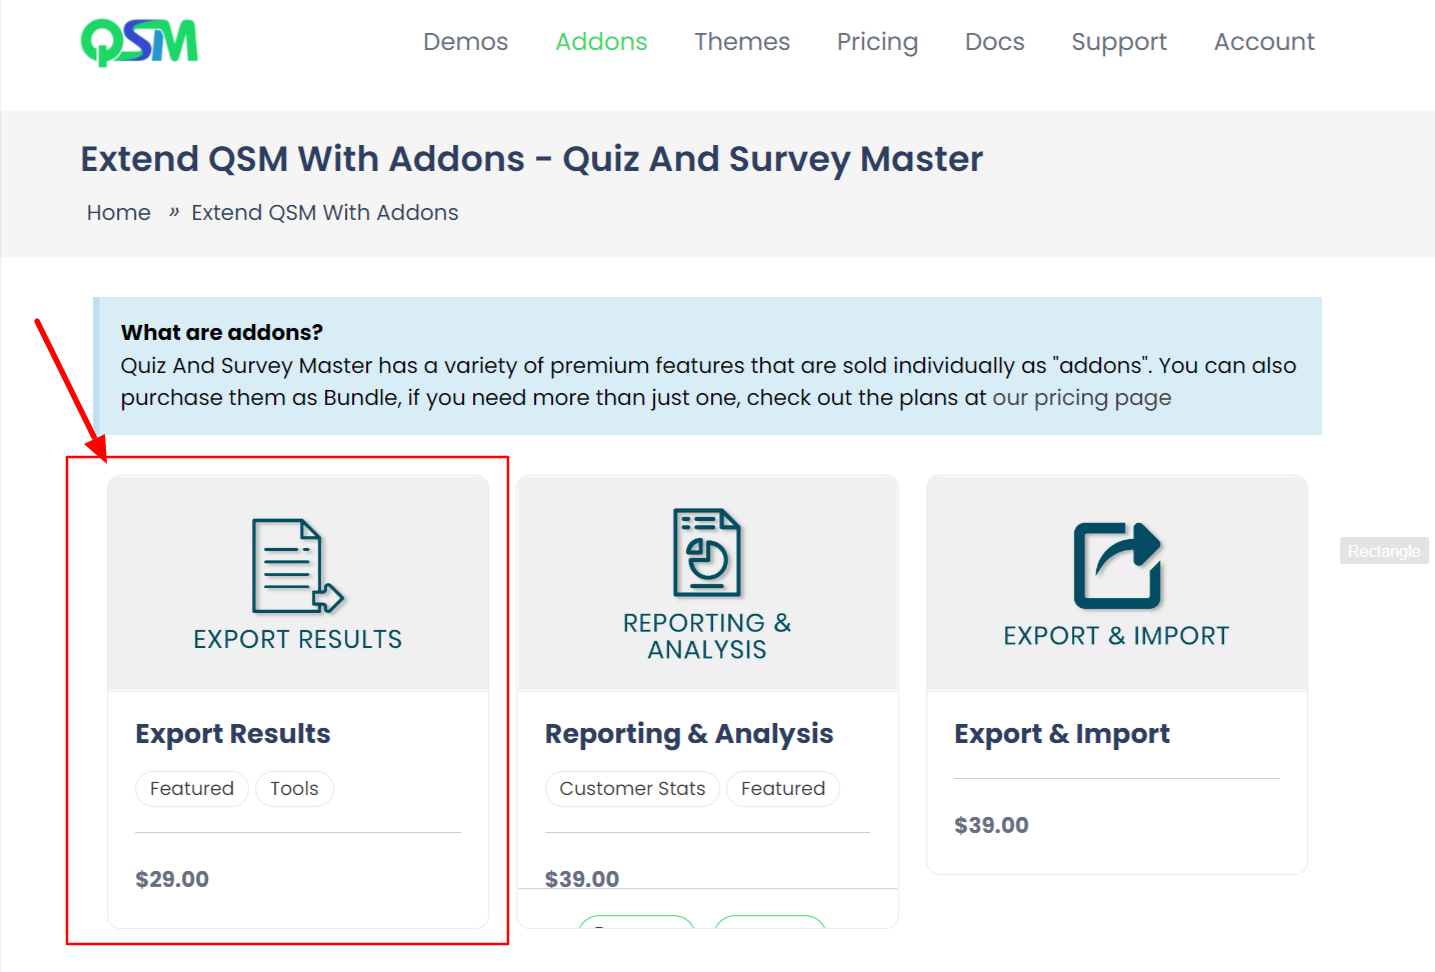 How to use export results Addon?